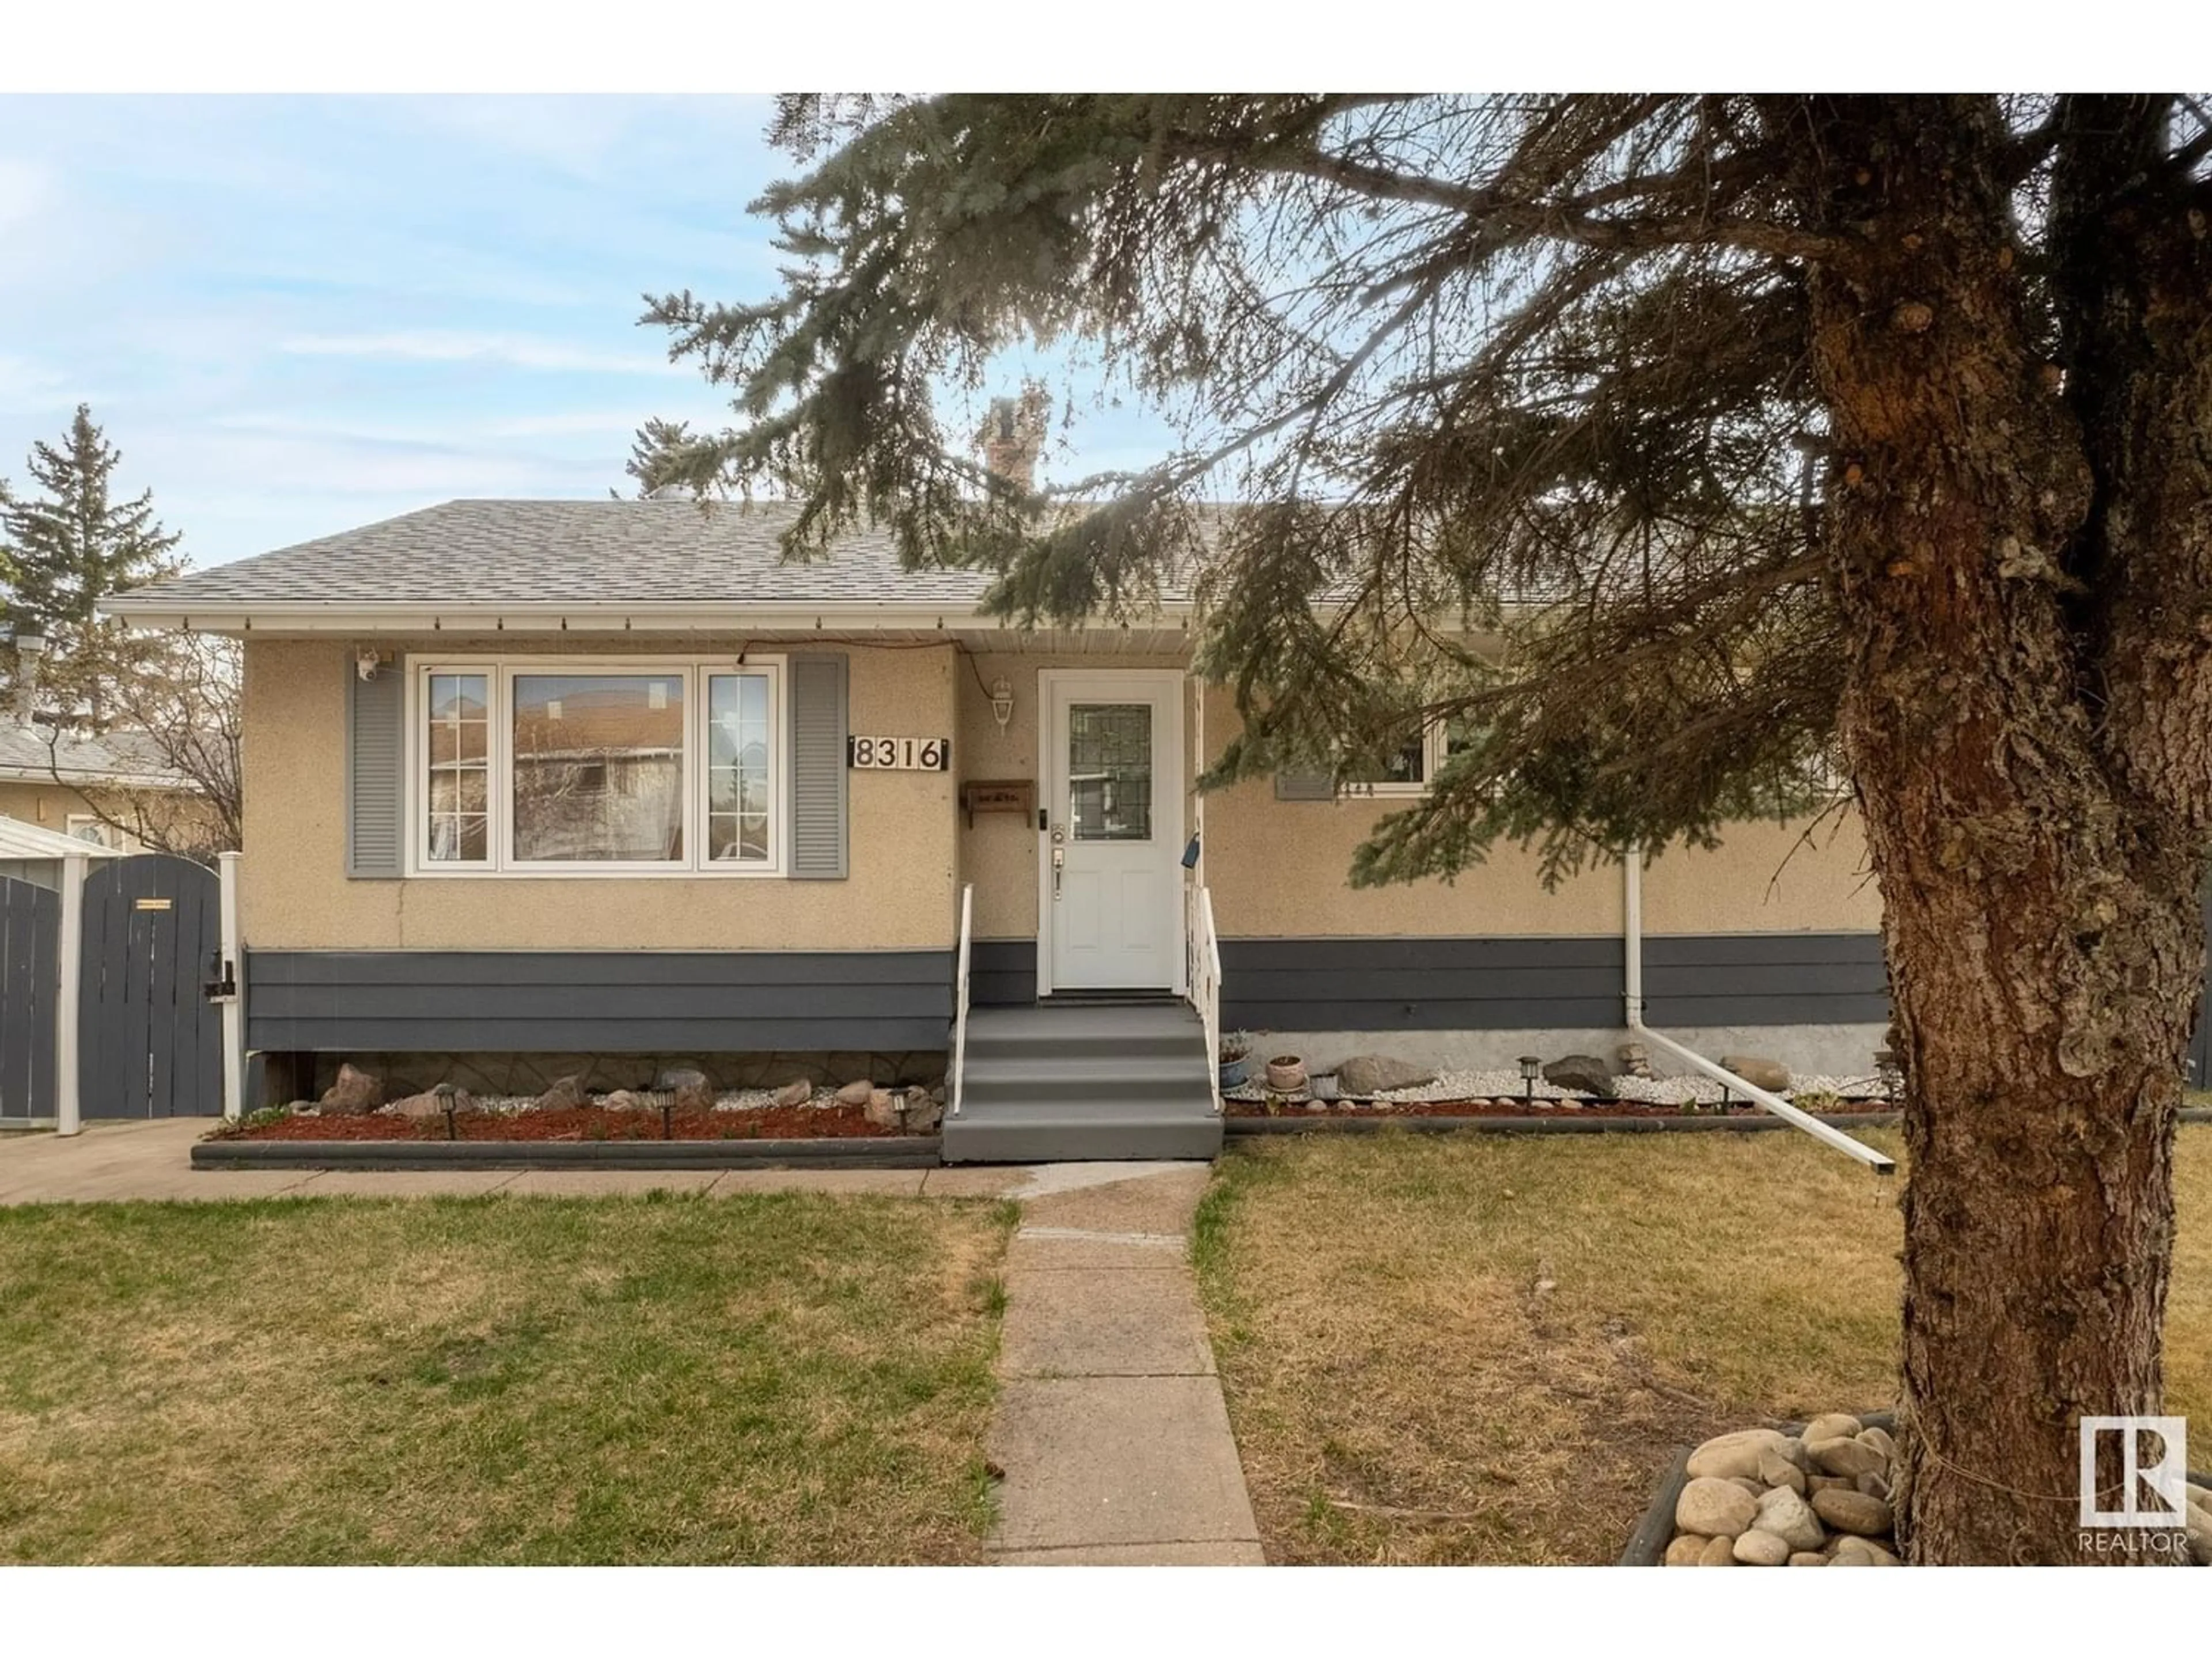 Frontside or backside of a home for 8316 171 ST NW, Edmonton Alberta T5T0L8